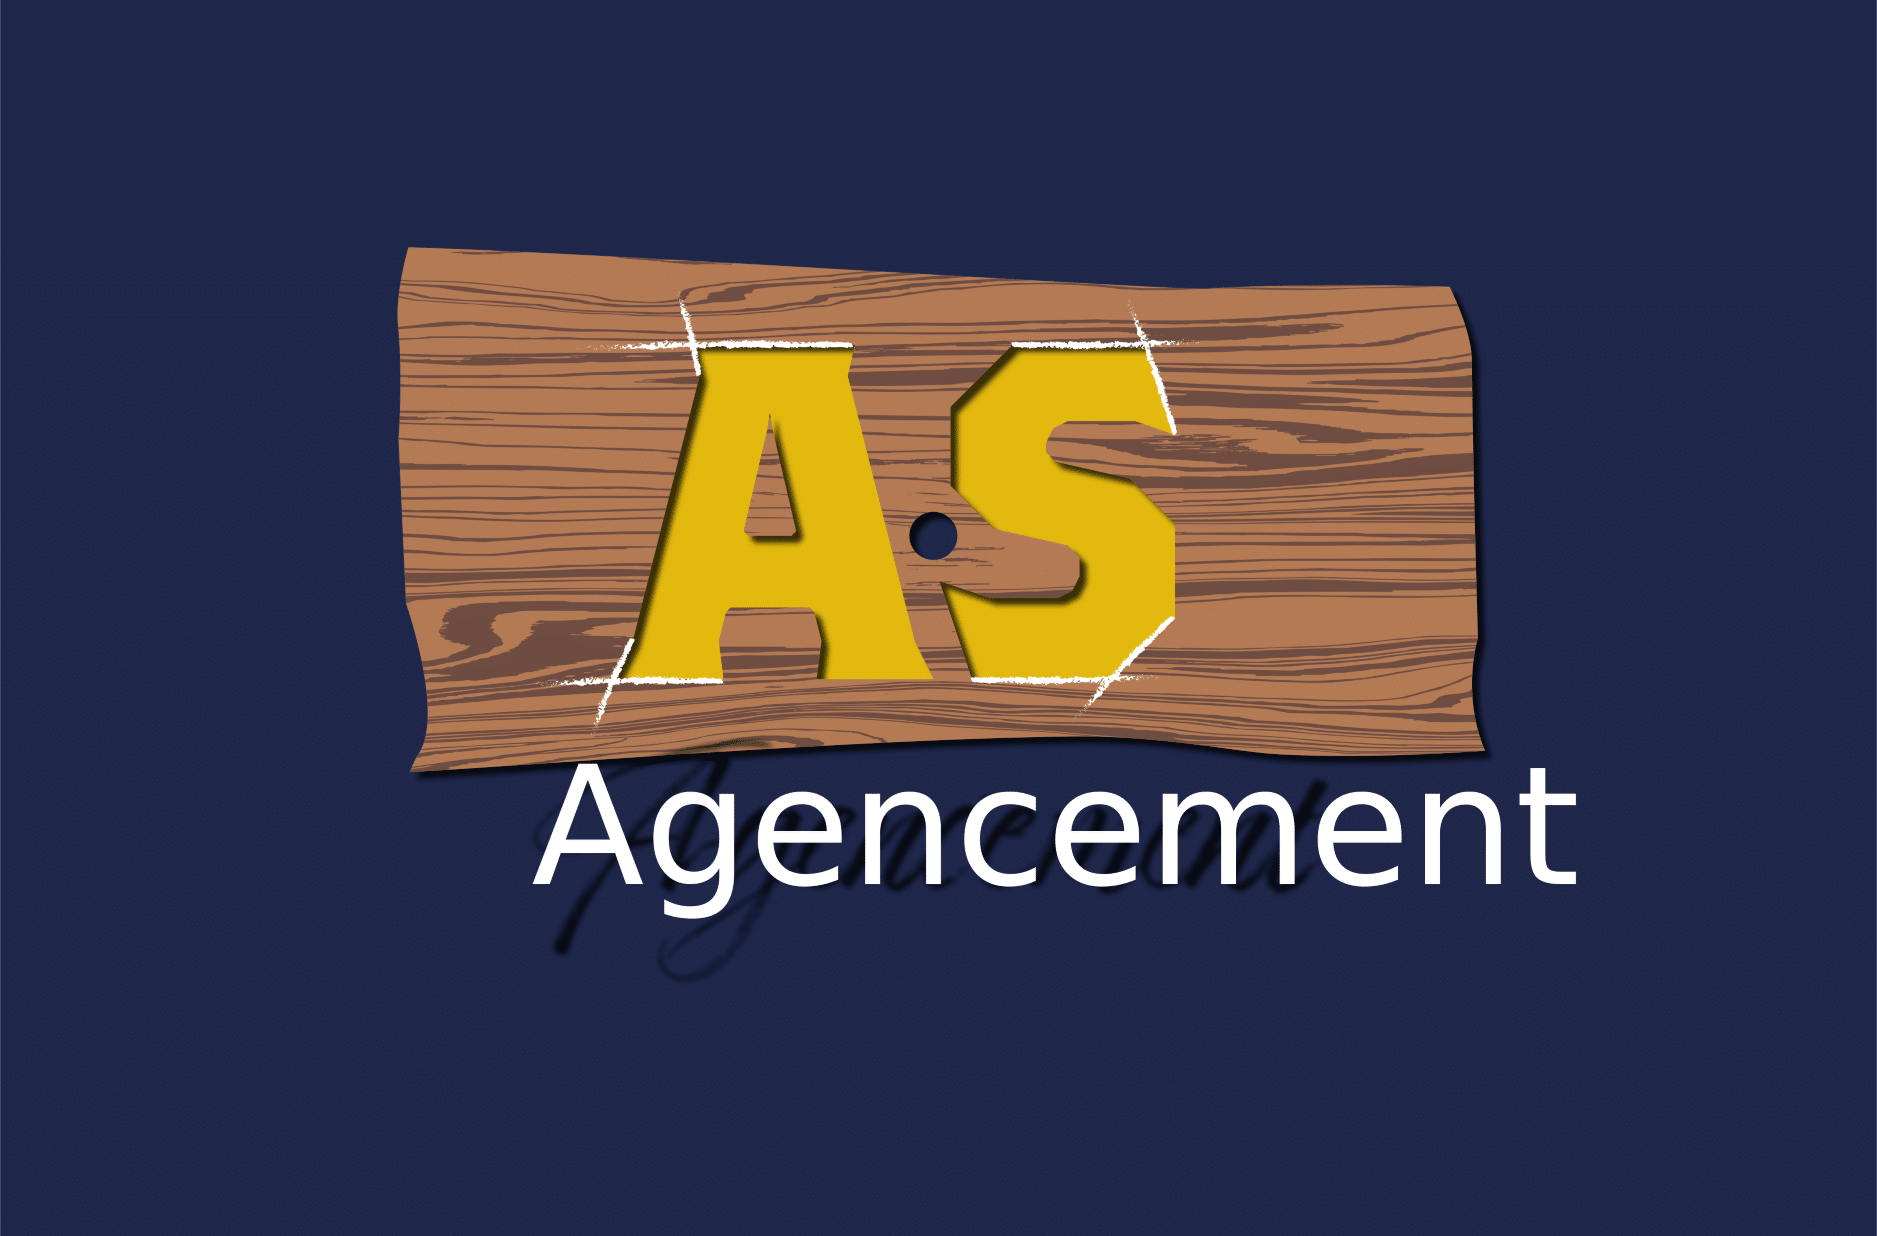 A.S Agencement